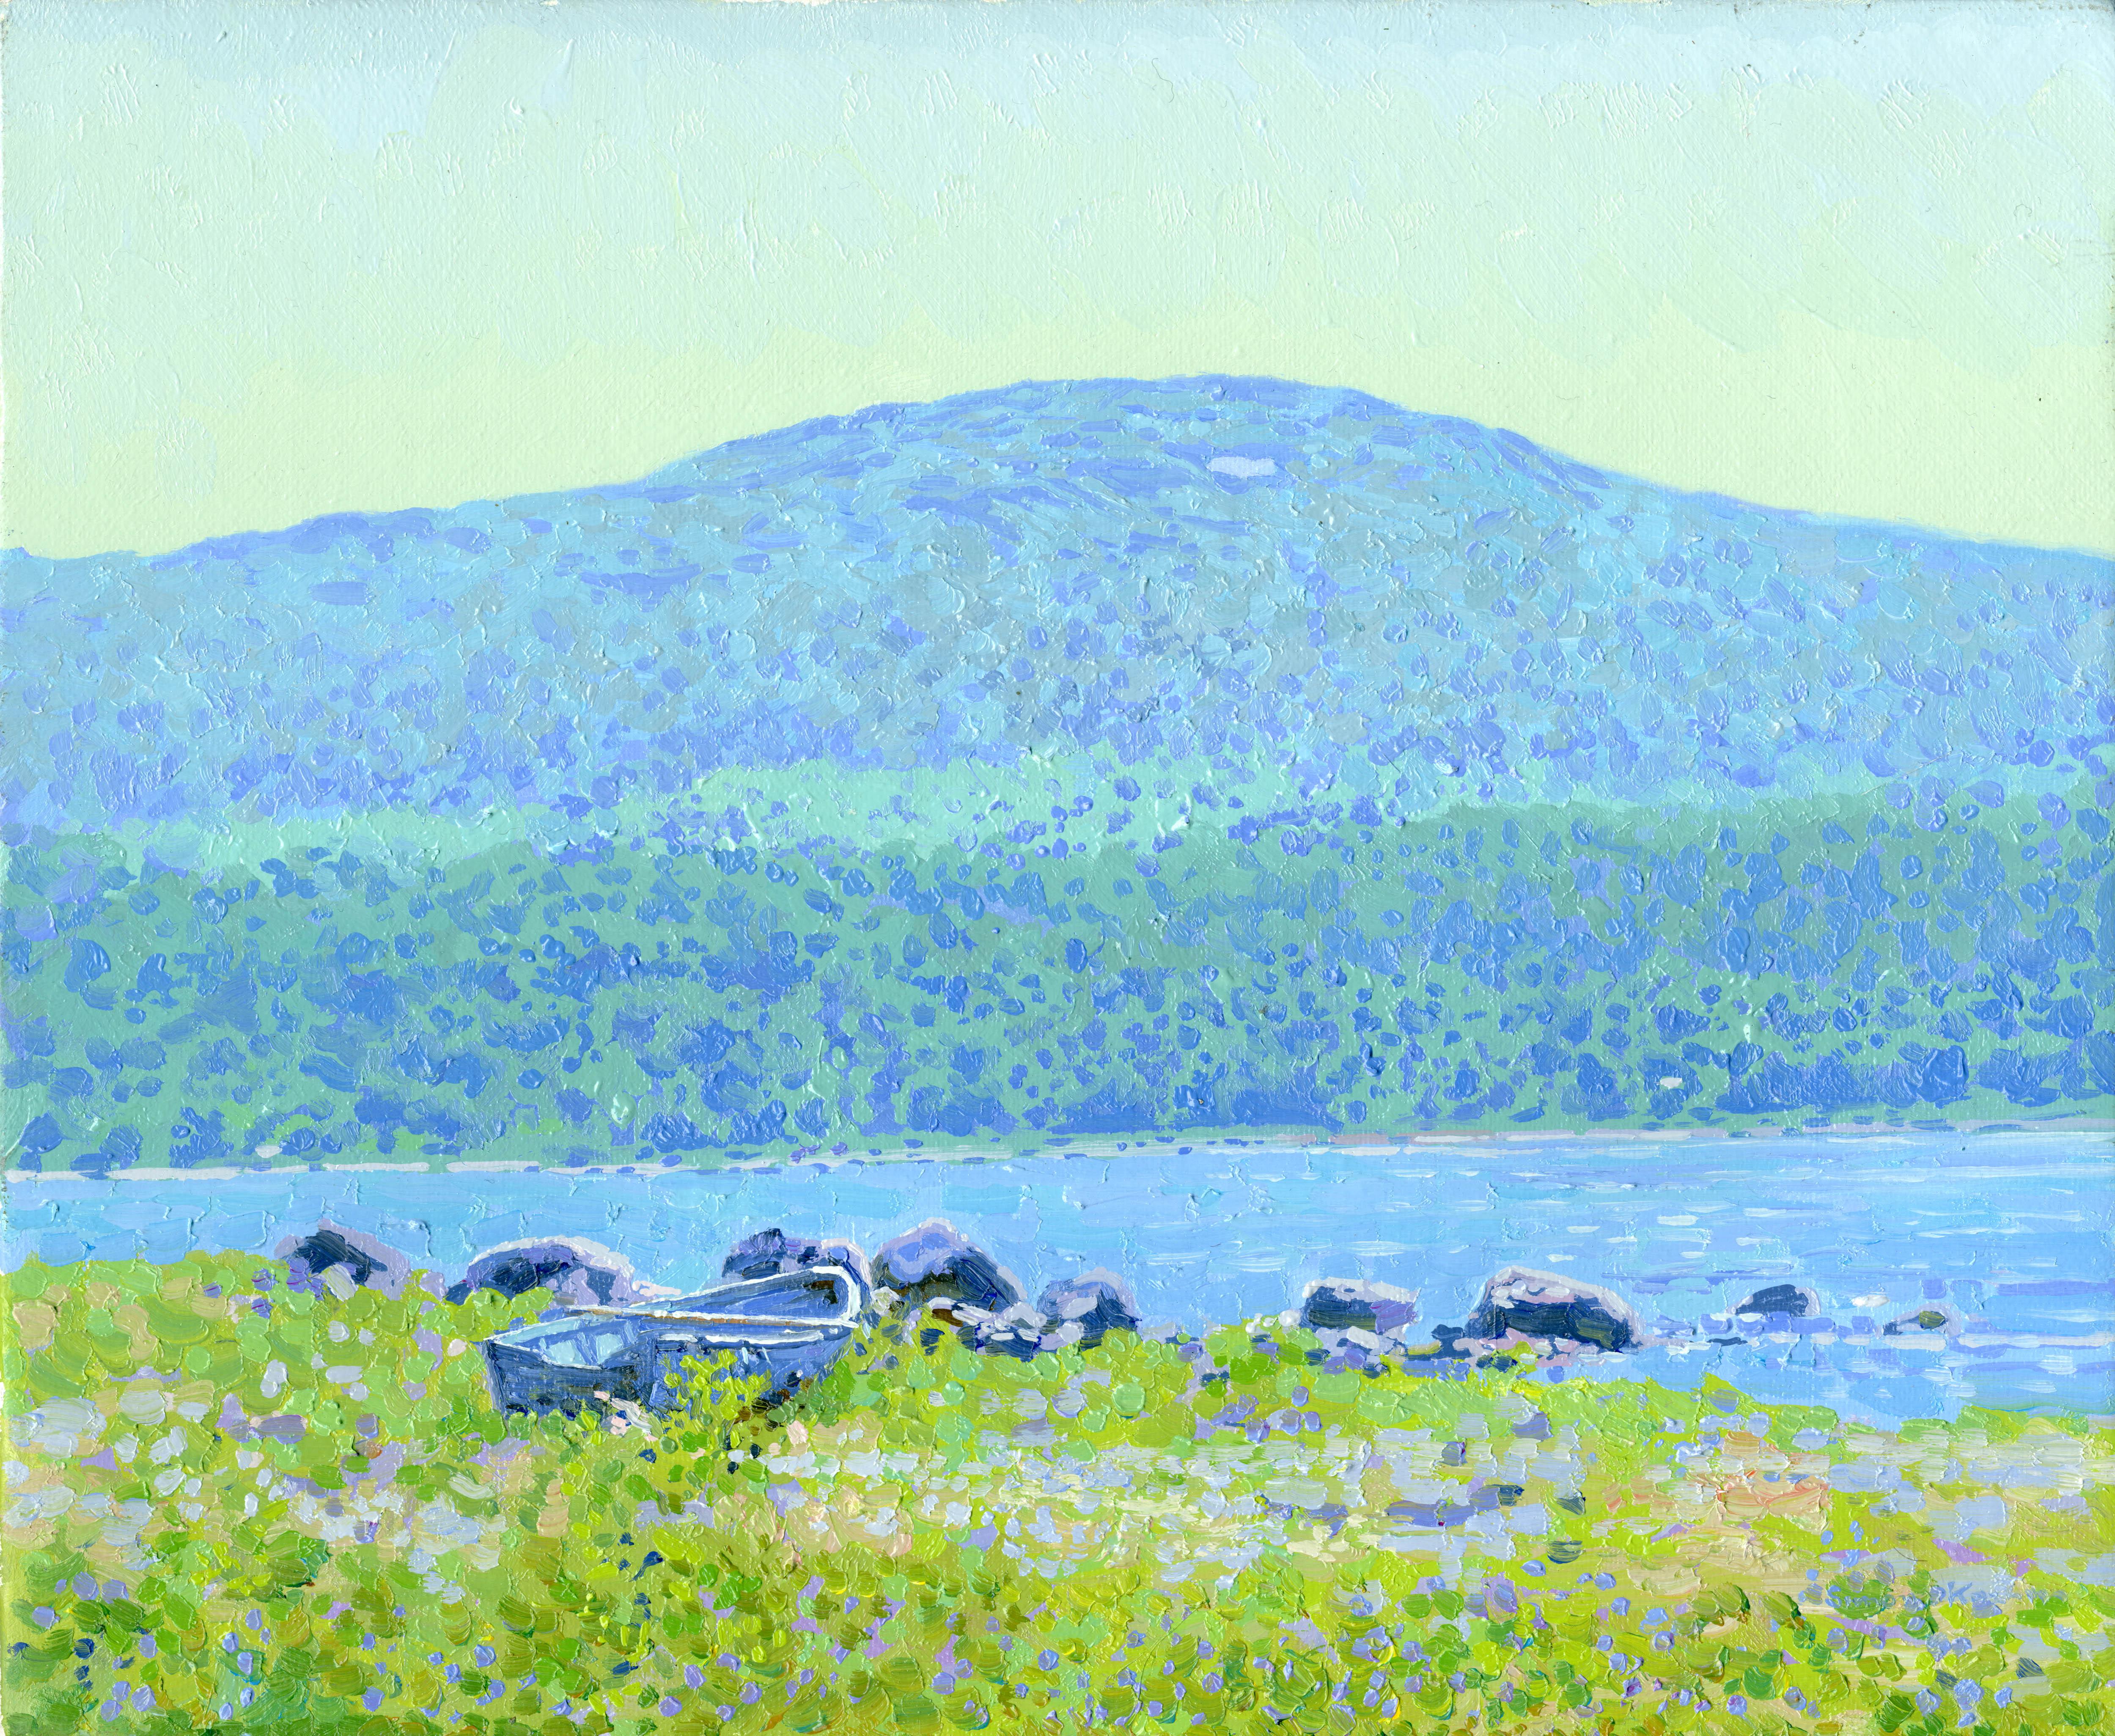 PLEASE NOTE: The painting will be shipped without a frame. The Framing option is available on request with an additional shipping cost.

Summer on the Kola Peninsula starts late. Lilacs bloom only at the end of June. White nights provide an